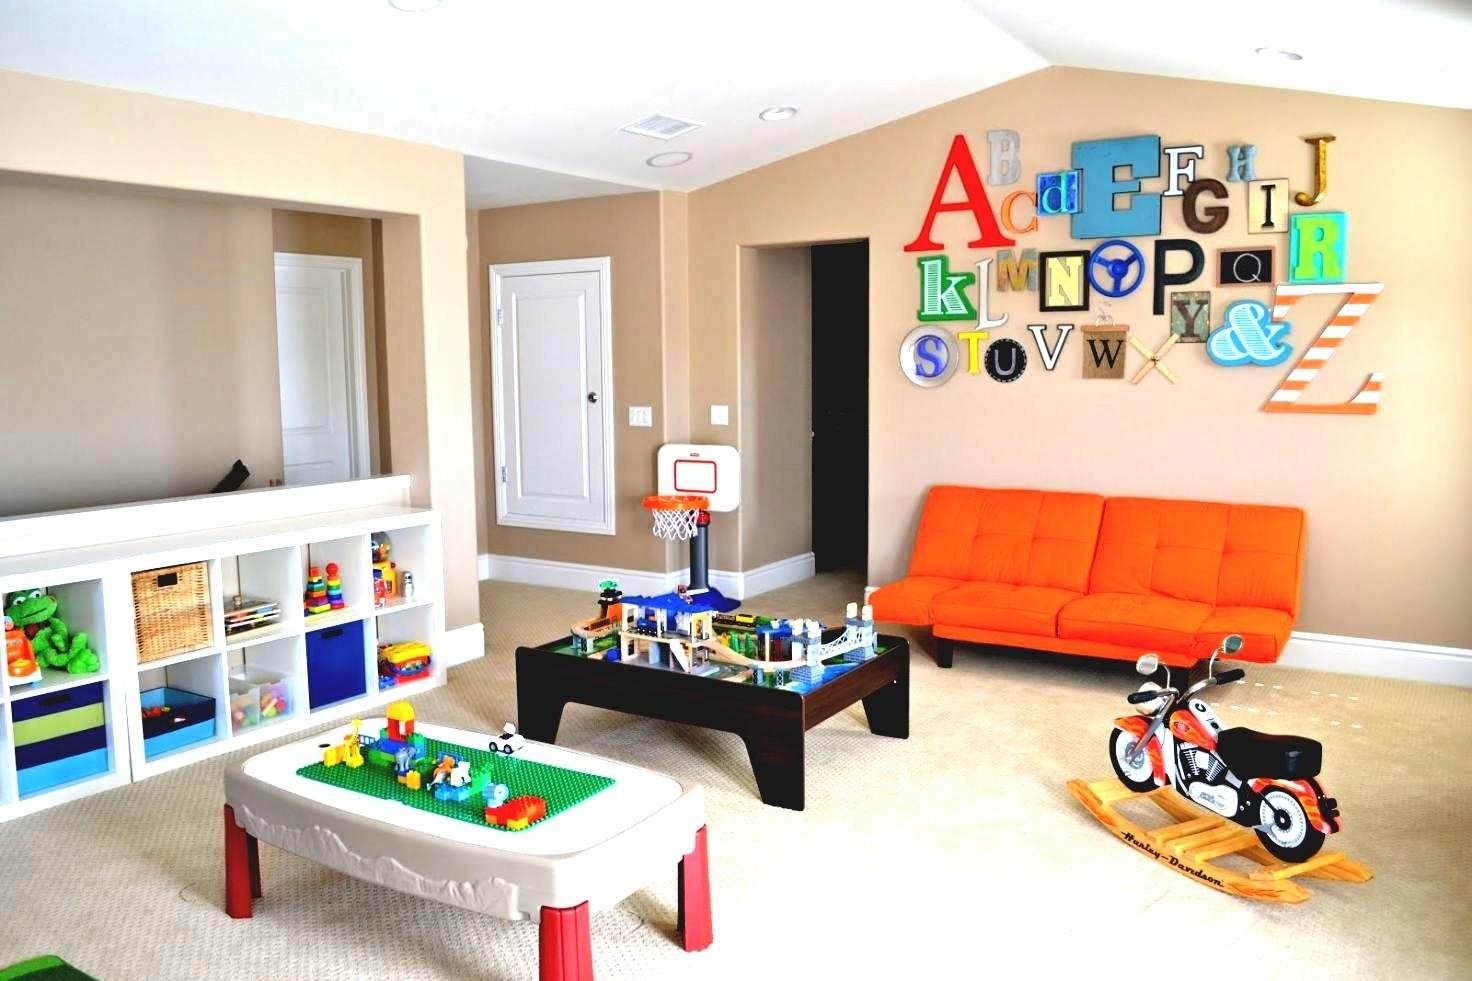 10 Gorgeous Game Room Ideas For Kids kids game room furniture ideas best decor for small spaces base 2023